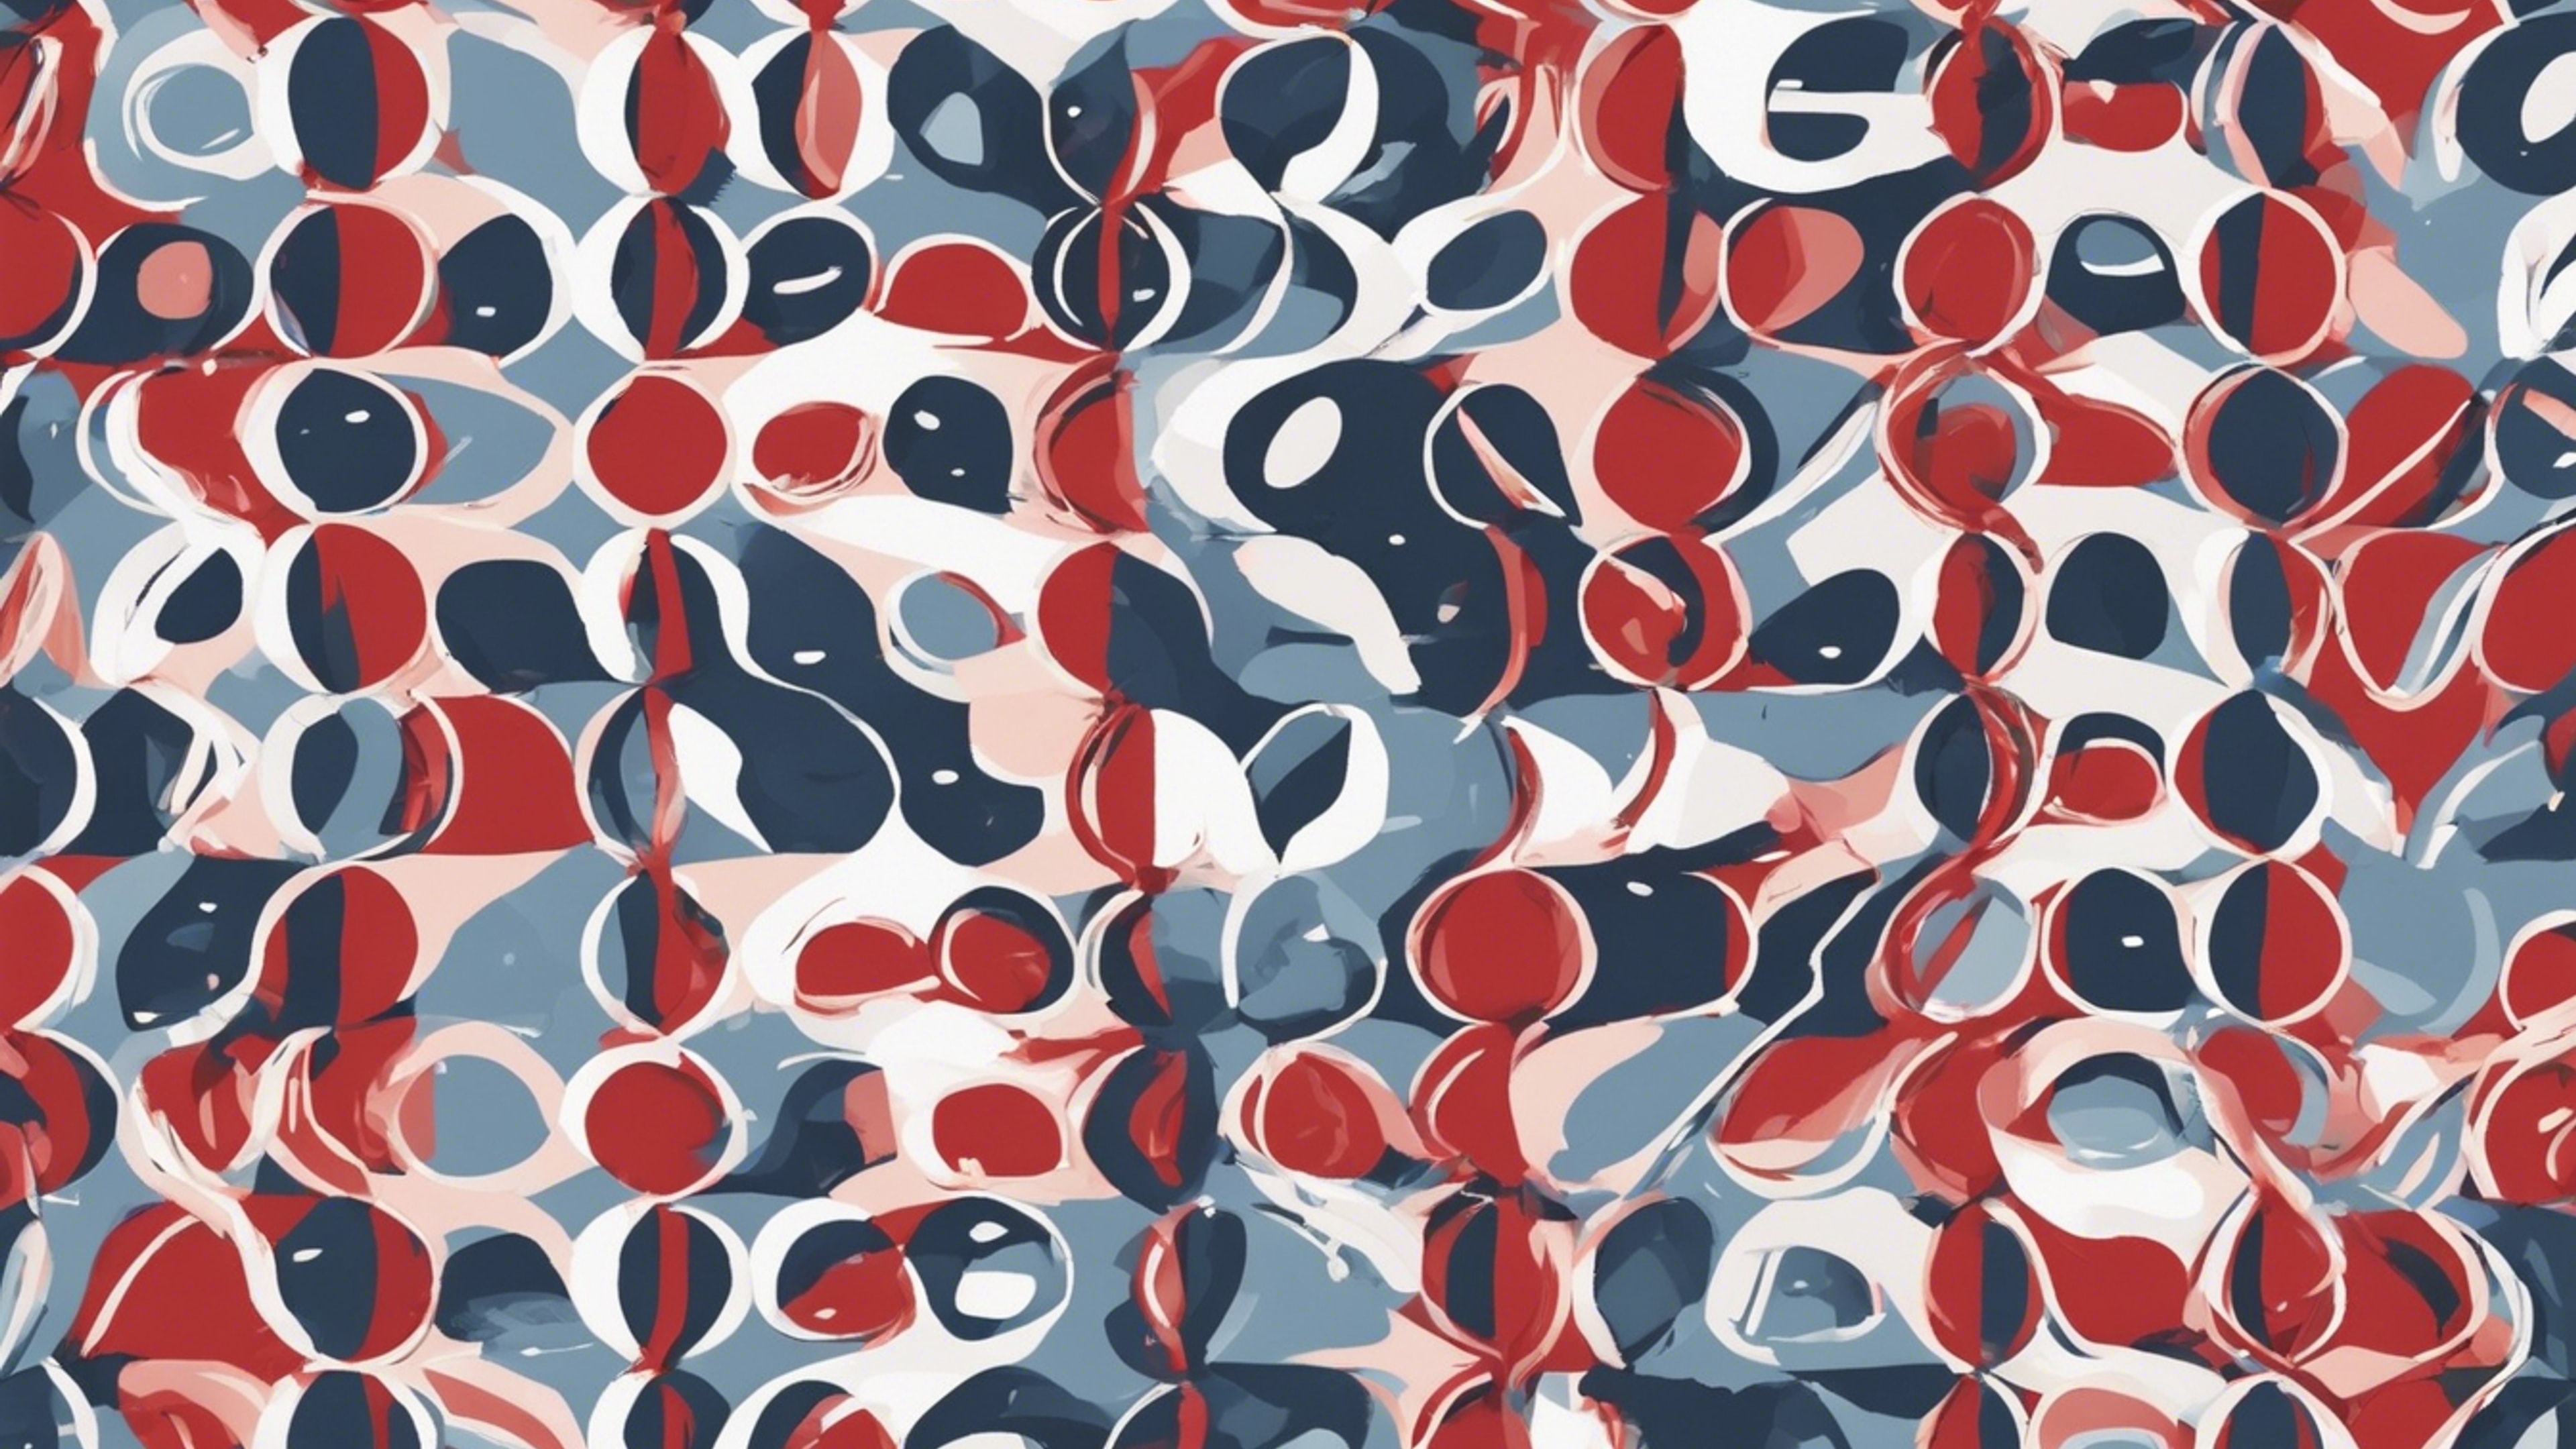 Simple and clean Scandinavian red and blue pattern. Тапет[367ad8fa403444a2bdd2]